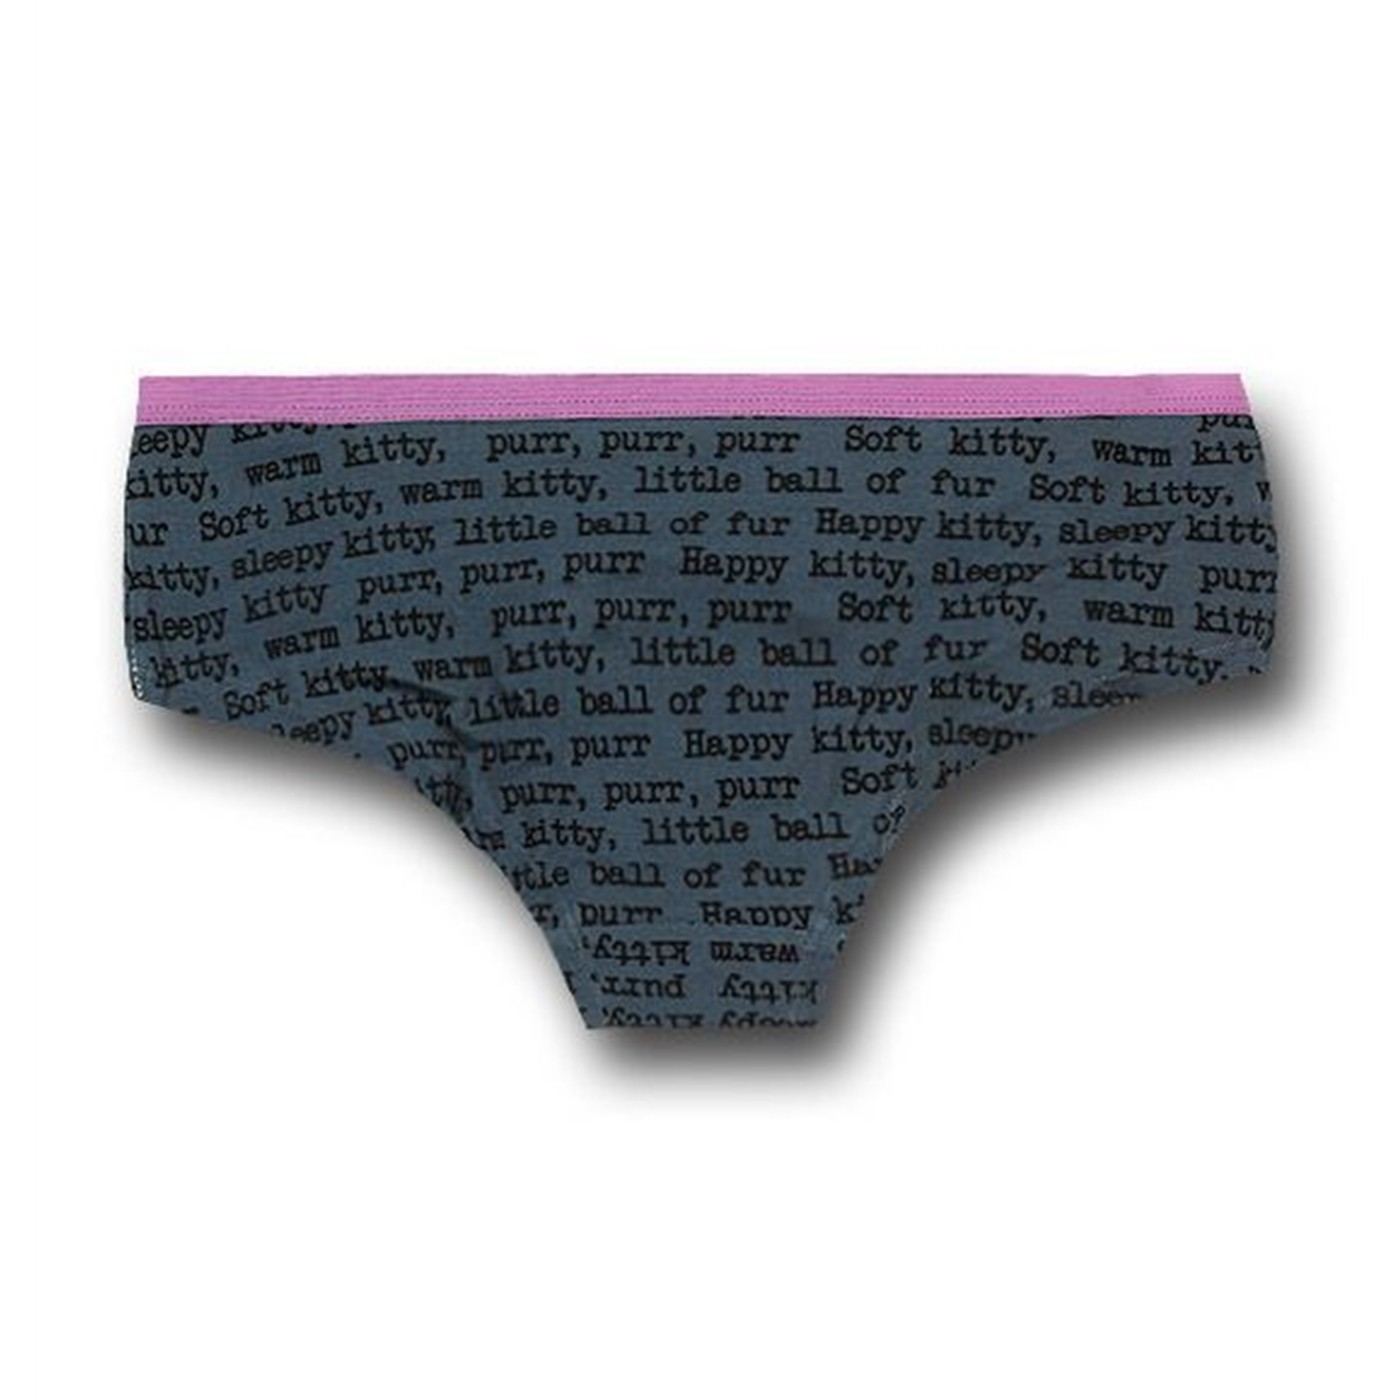 Big Bang Theory Soft Kitty Women's Hipster Briefs 3-Pack